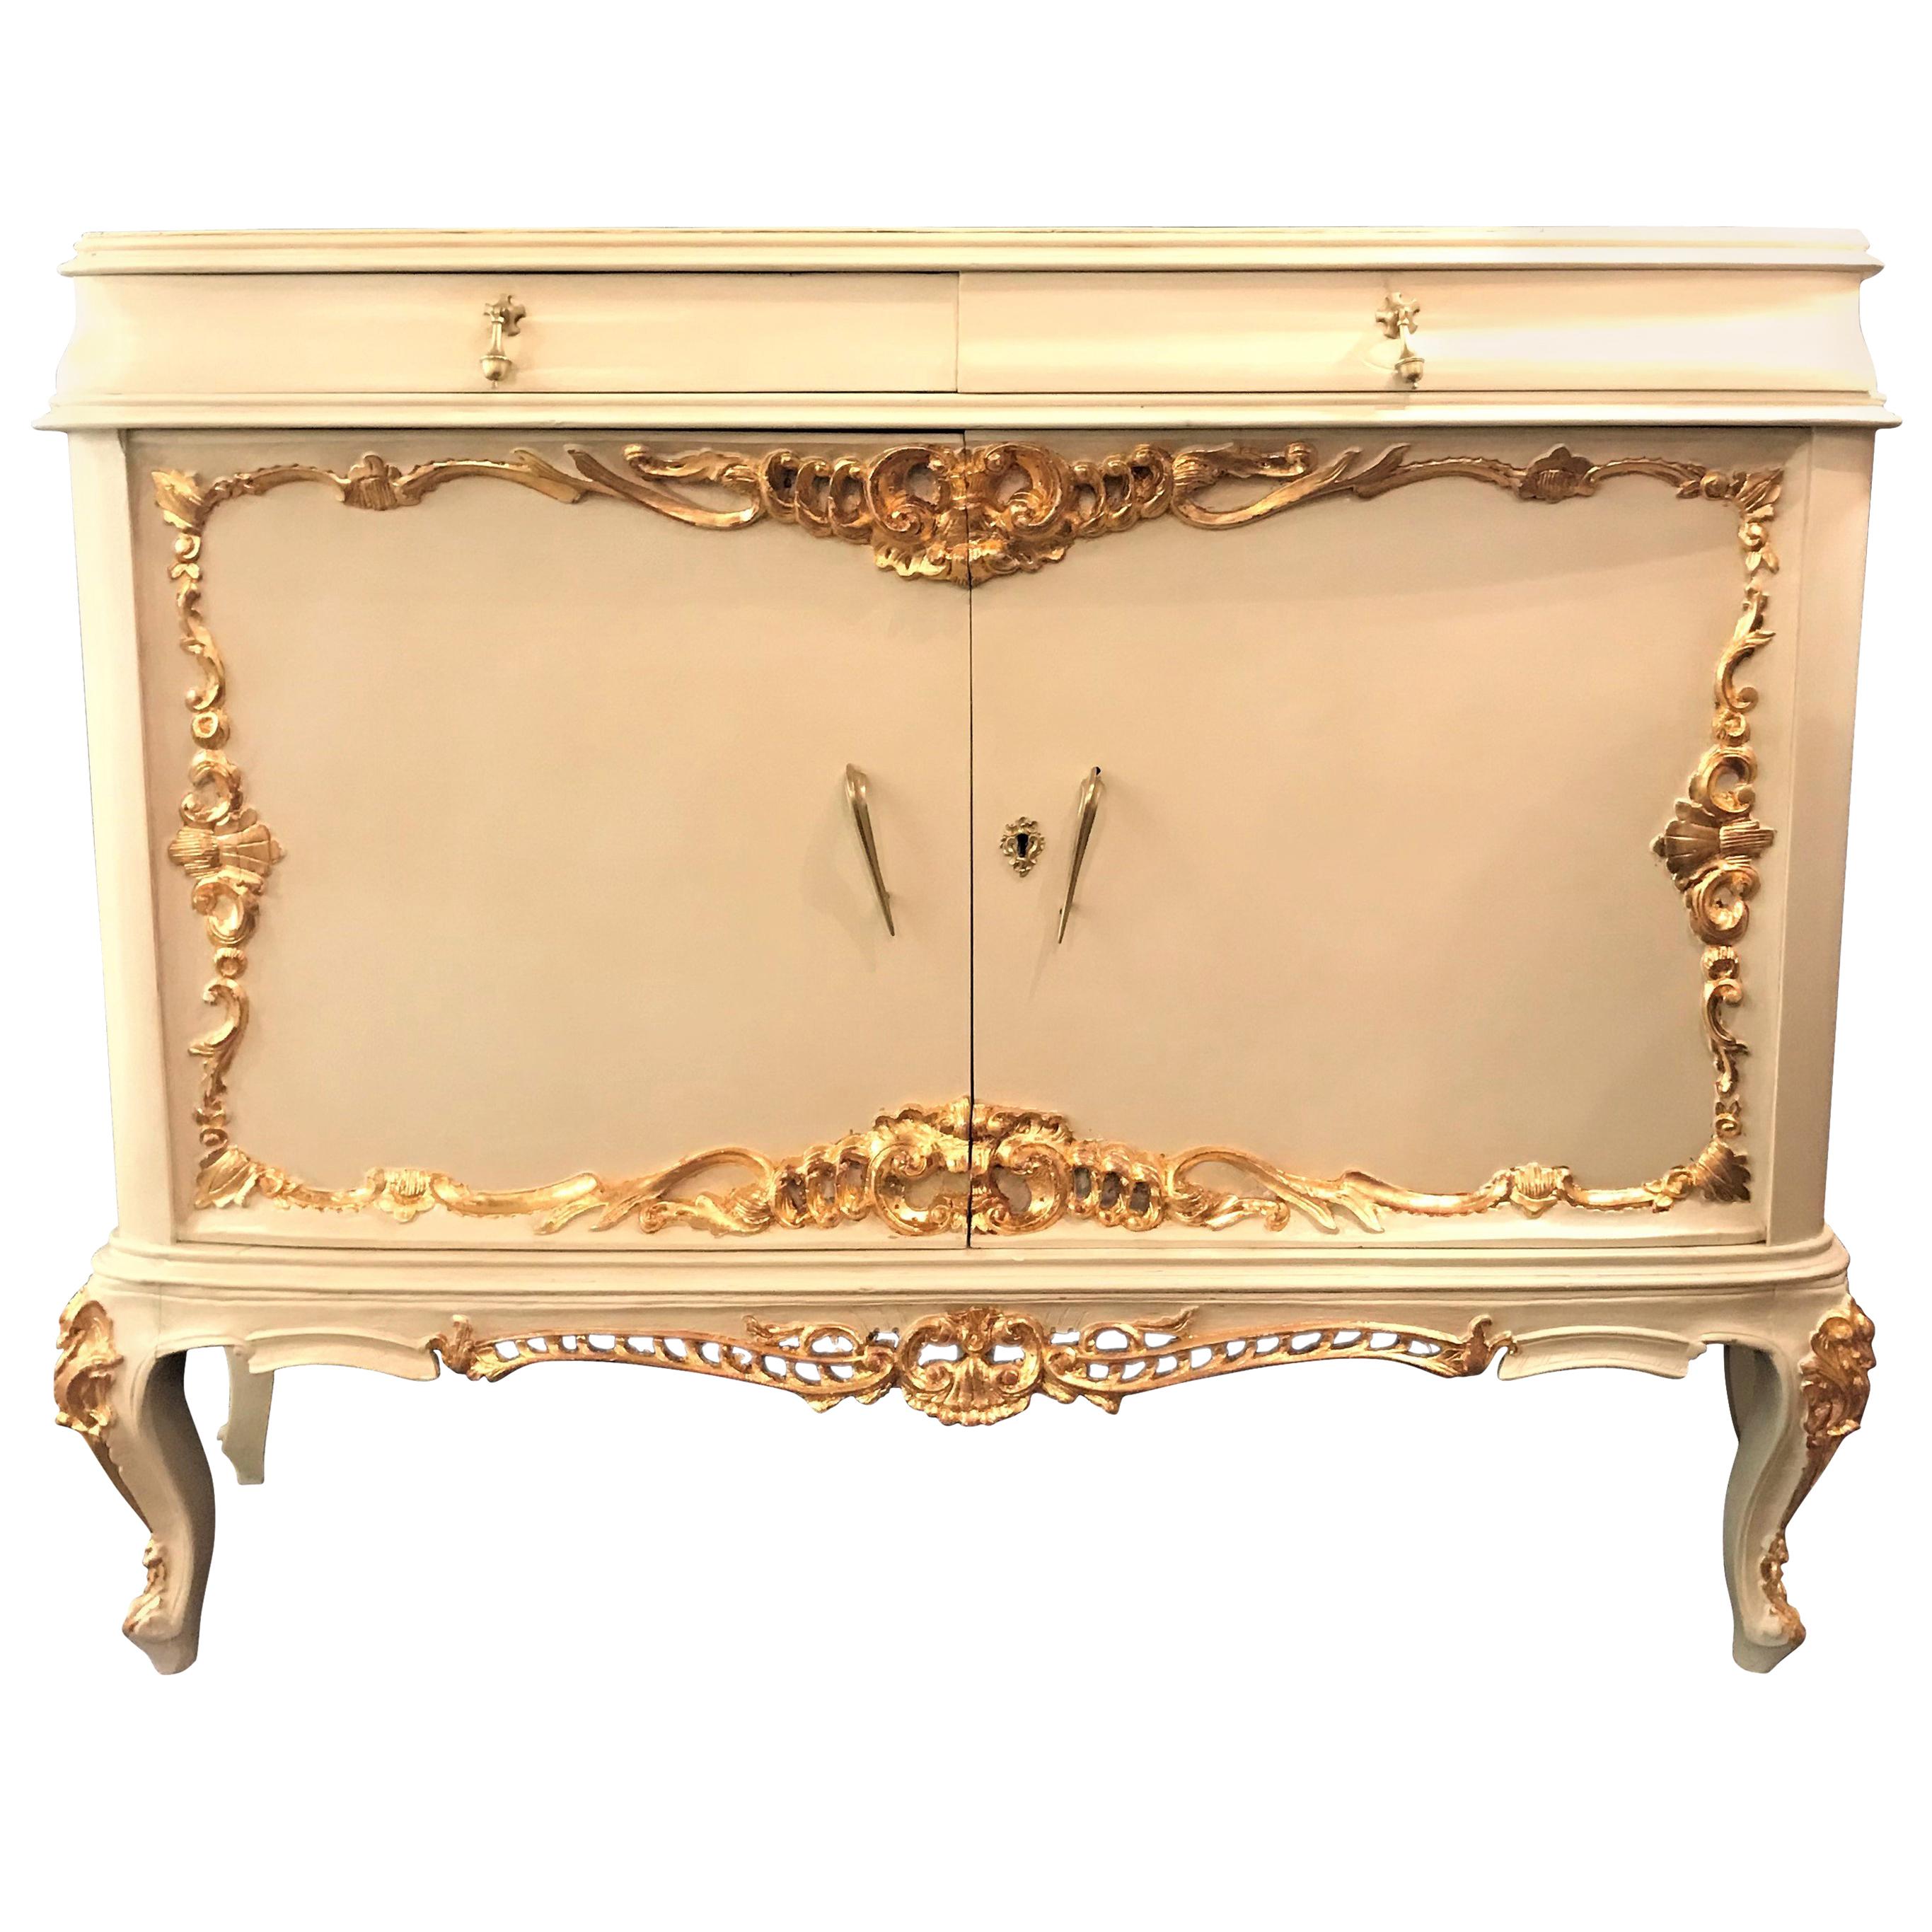 Parcel-Gilt and Paint Decorated Two-Drawer and Two-Door Louis XV Style Cabinet